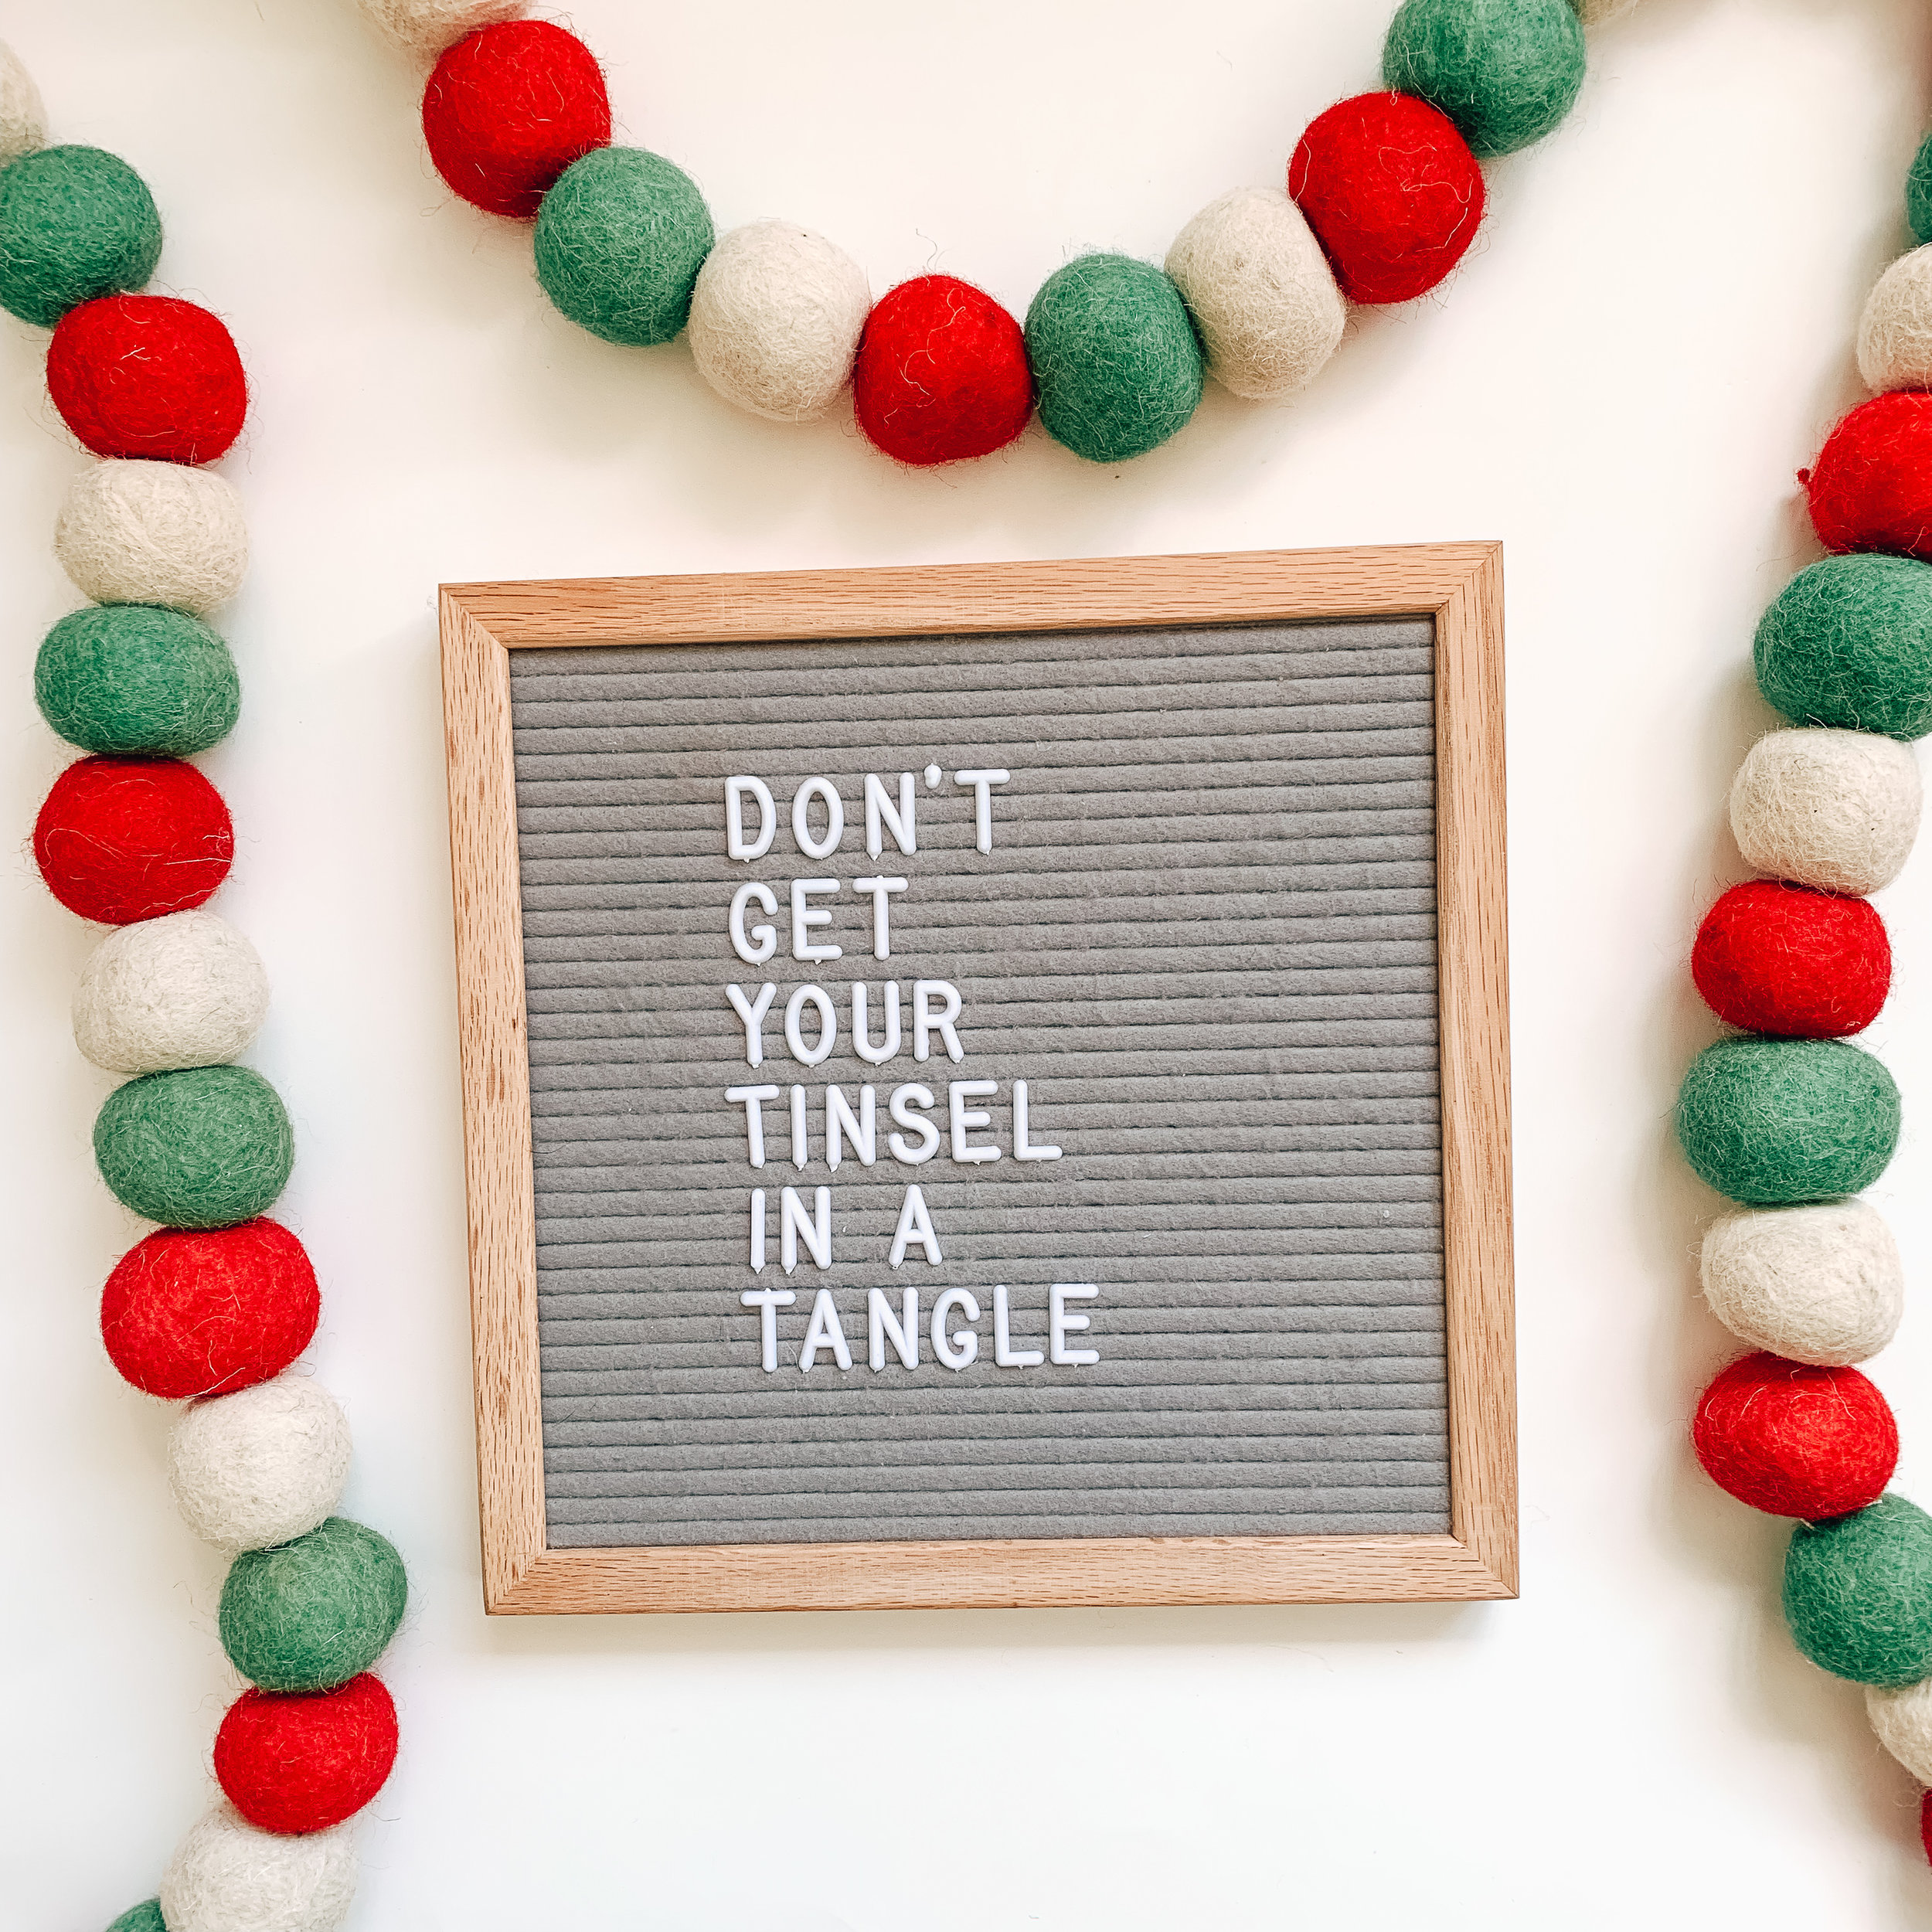 Catchy Letter Board Quotes for the Holidays — Hustle Sanely® by Jess Massey